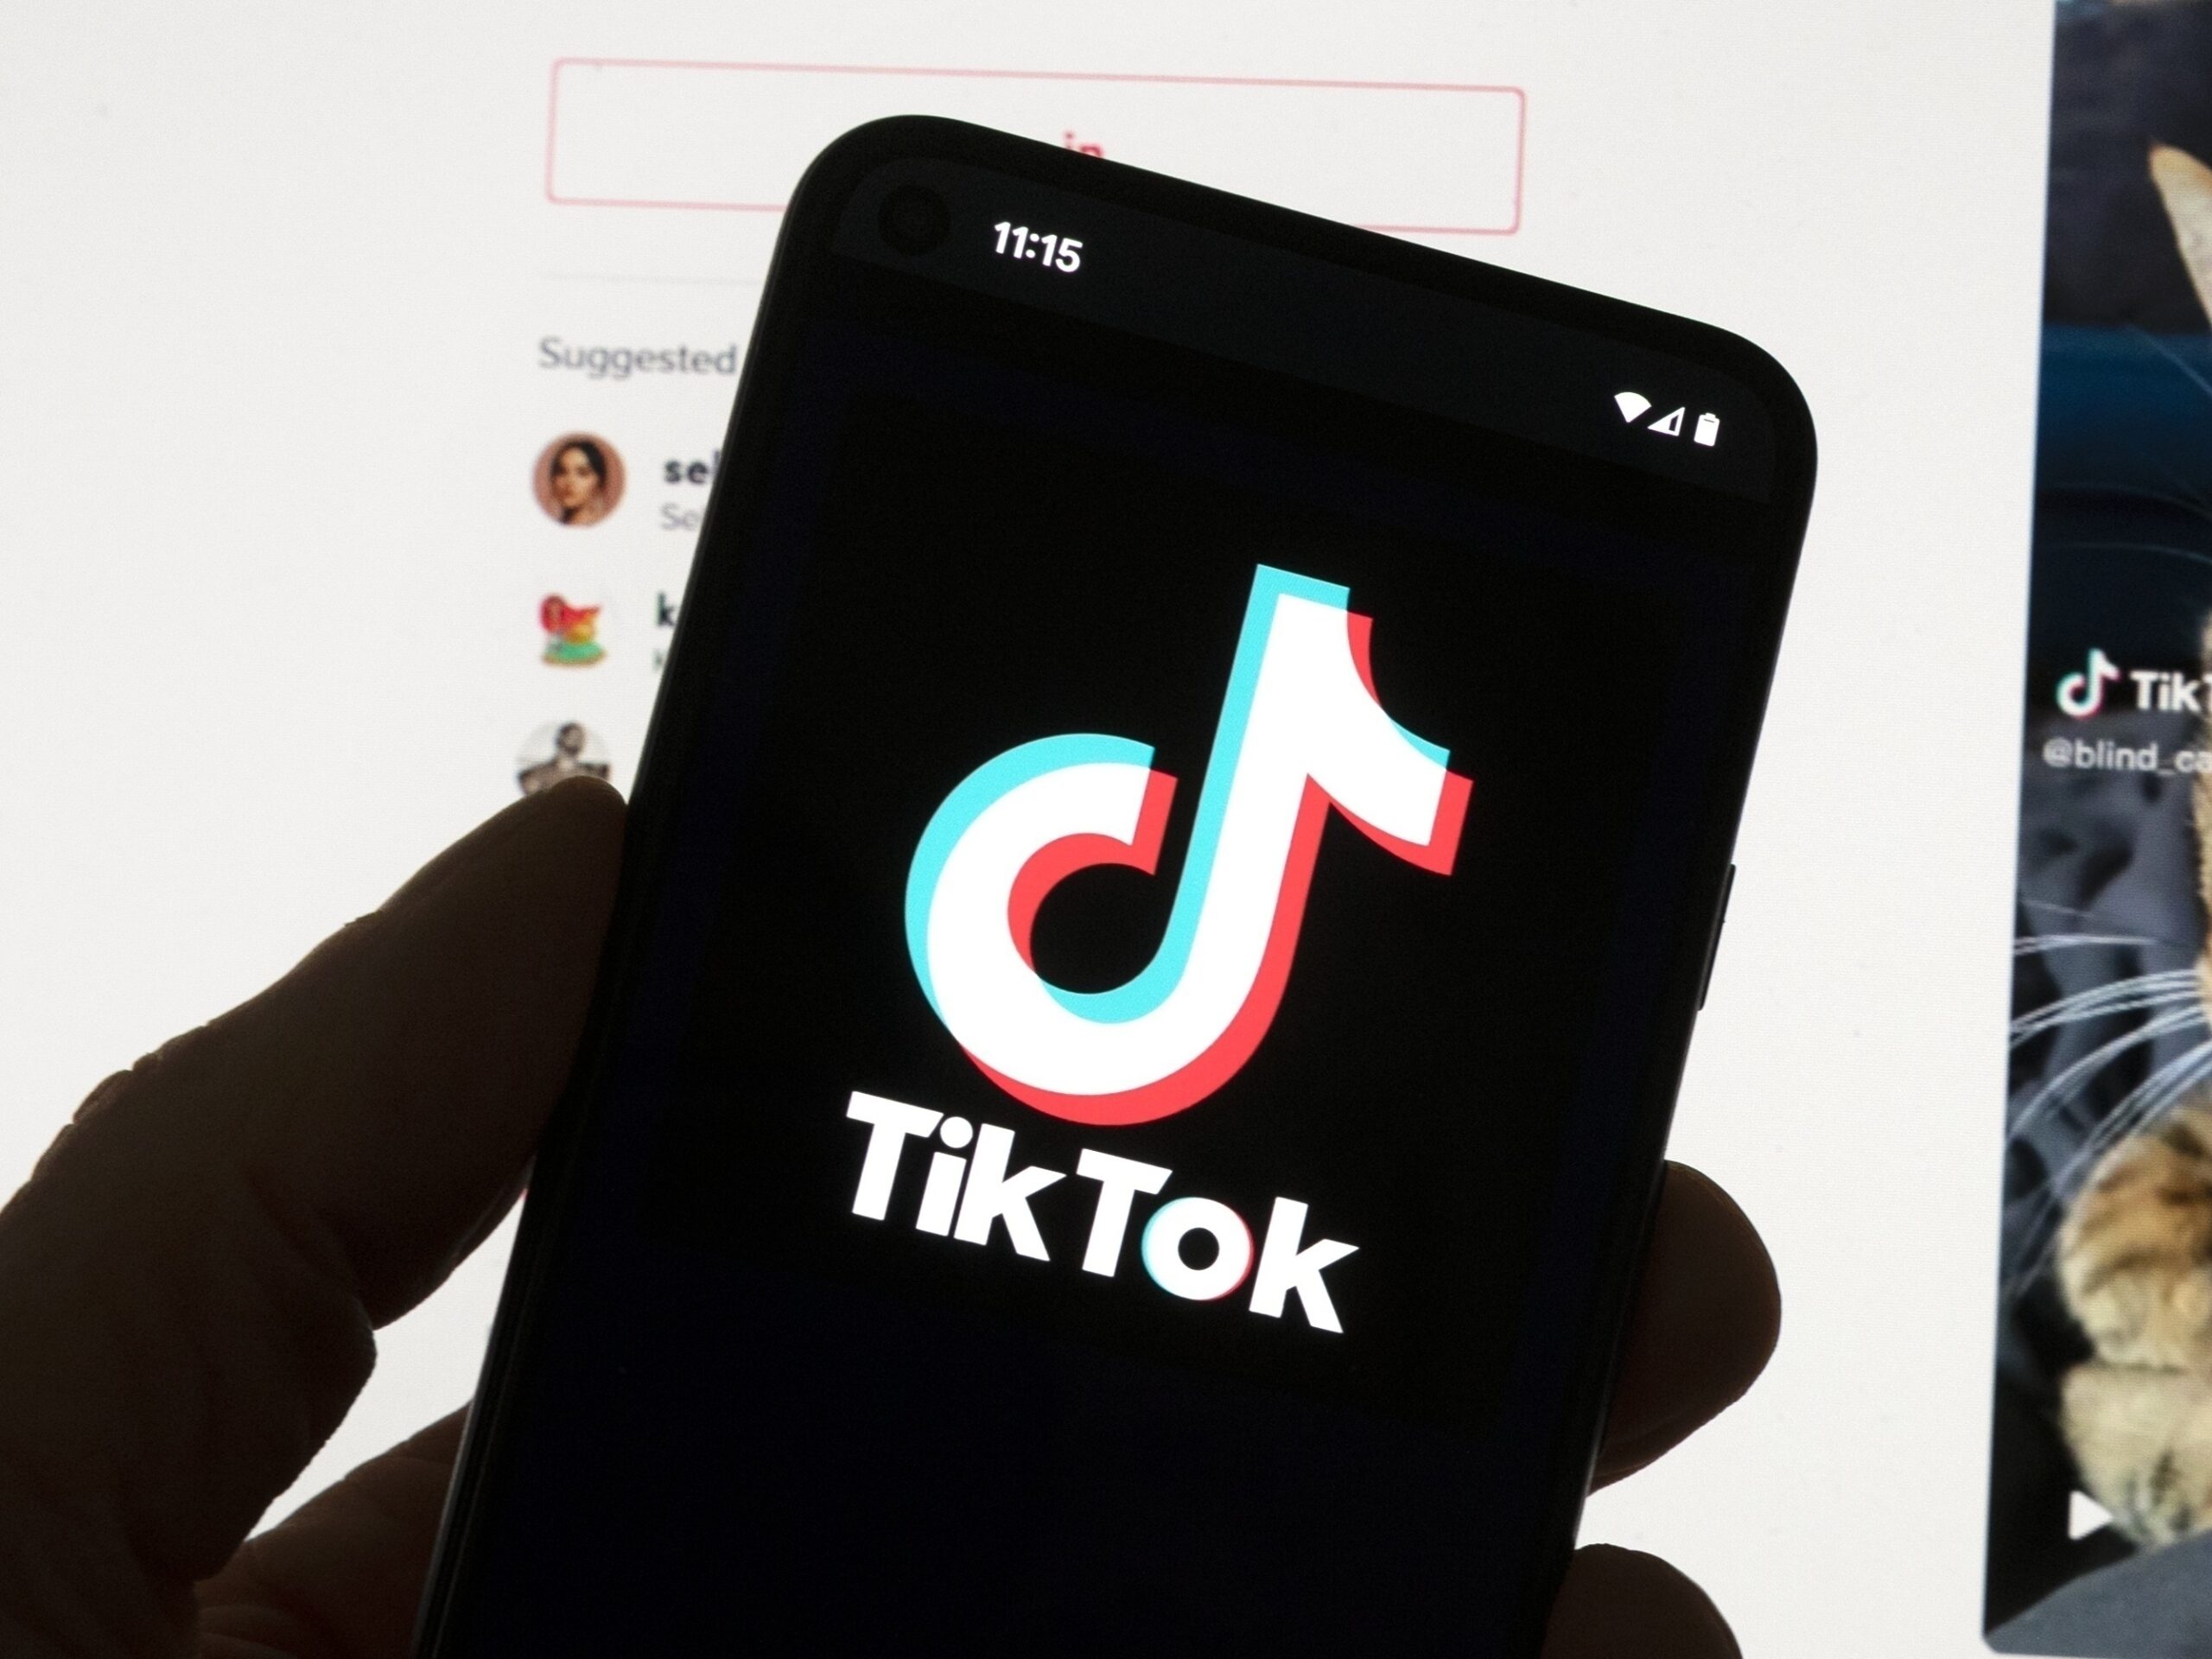 The latest effort in Congress to force TikTok to be sold is the most serious threat yet to the app's future in the U.S.